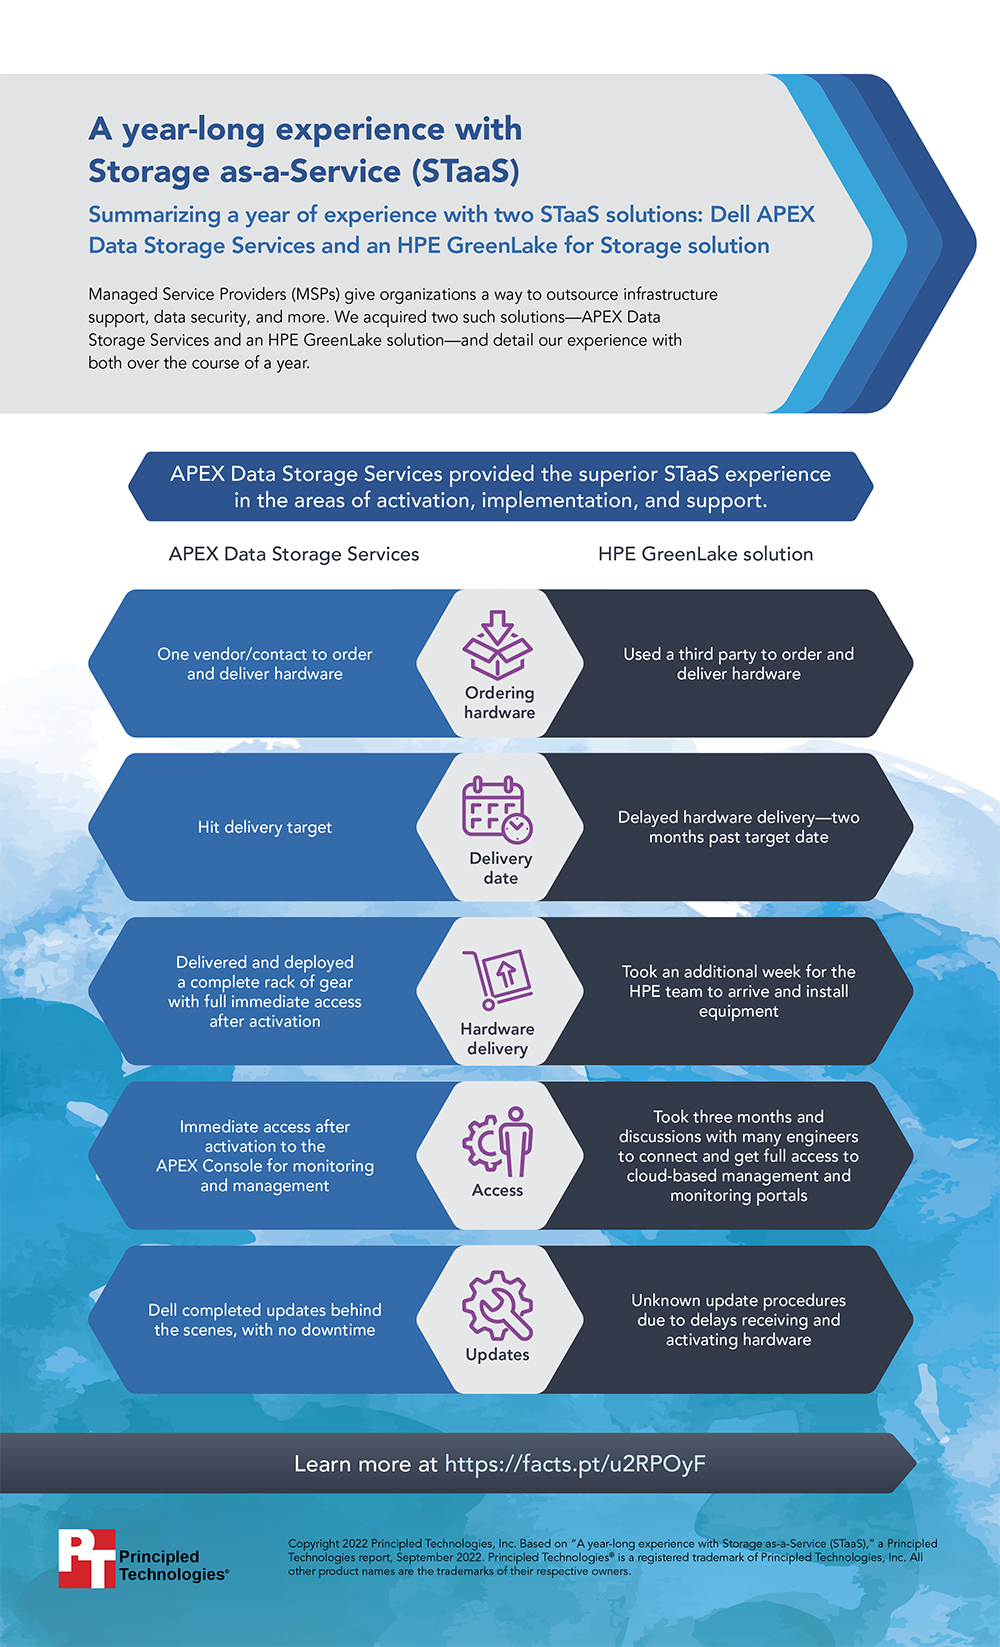 A year-long experience with Storage as-a-Service (STaaS) - Infographic